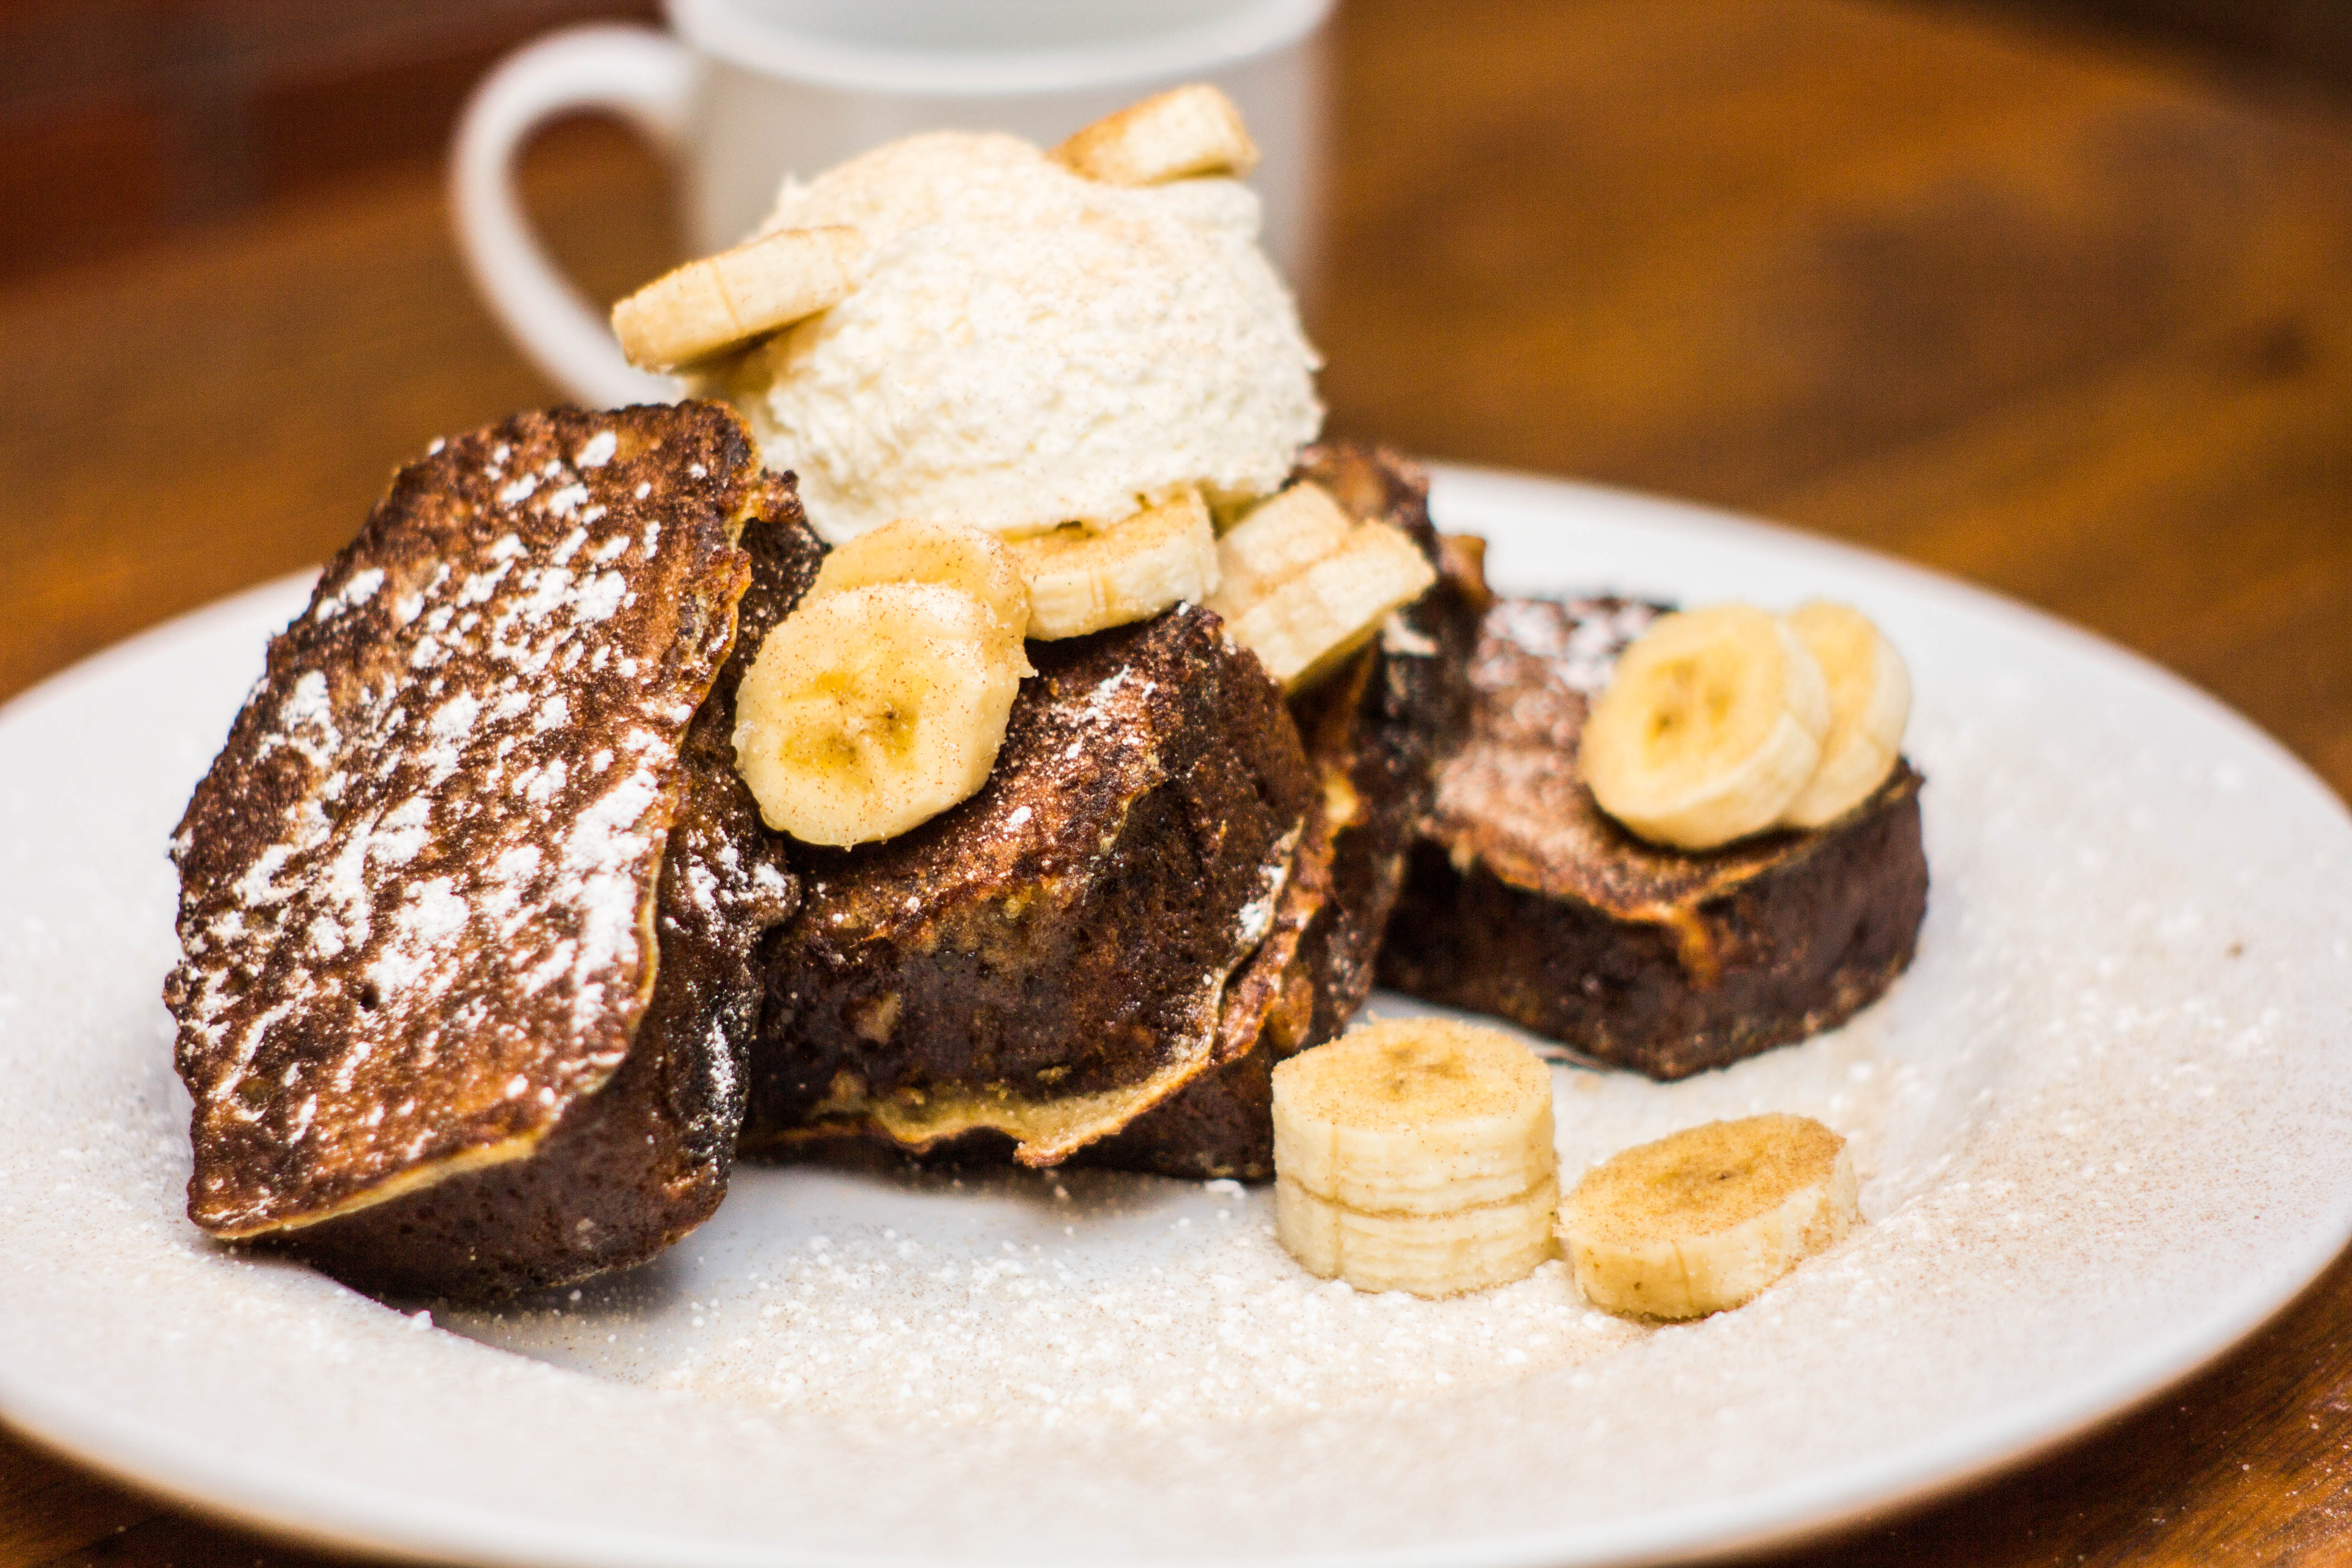 A plate a French toast made with banana bread is embellished with sliced bananas, whipped cream, and powdered sugar. A cup of coffee sits behind it.